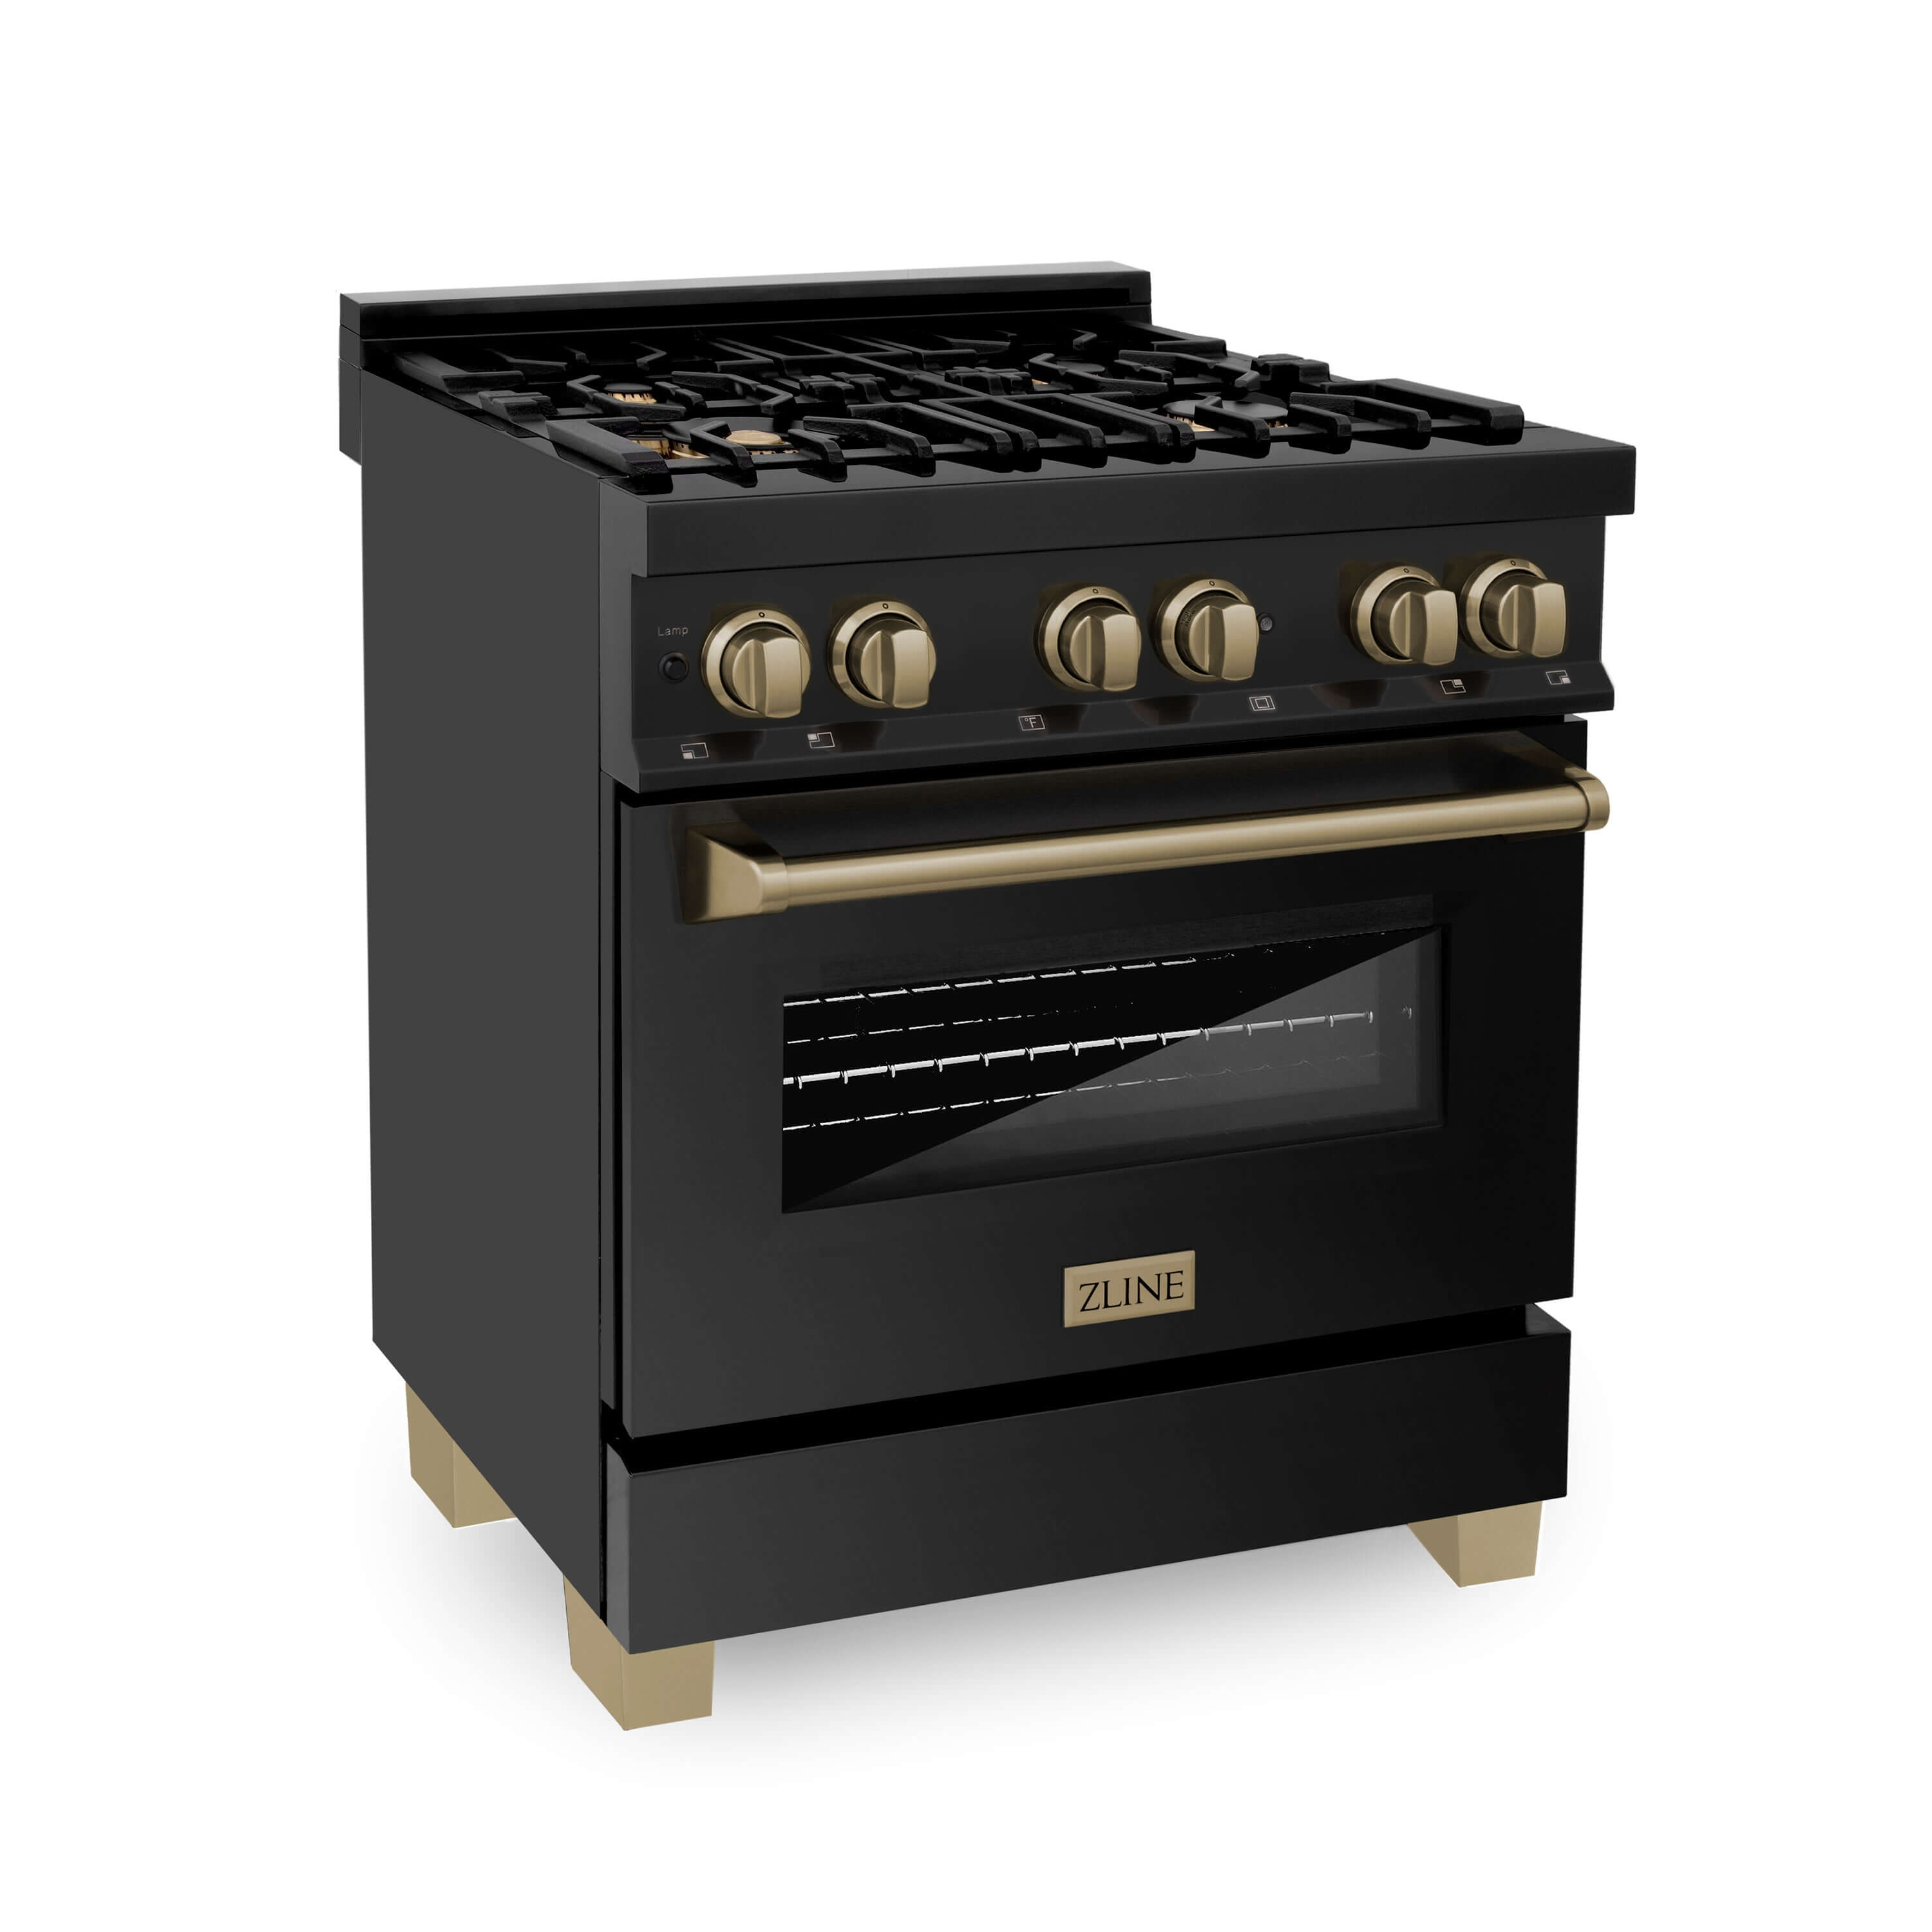 ZLINE Autograph Edition 30" Black Stainless Steel Dual Fuel Range with Champagne Bronze accents (RABZ-30-CB)